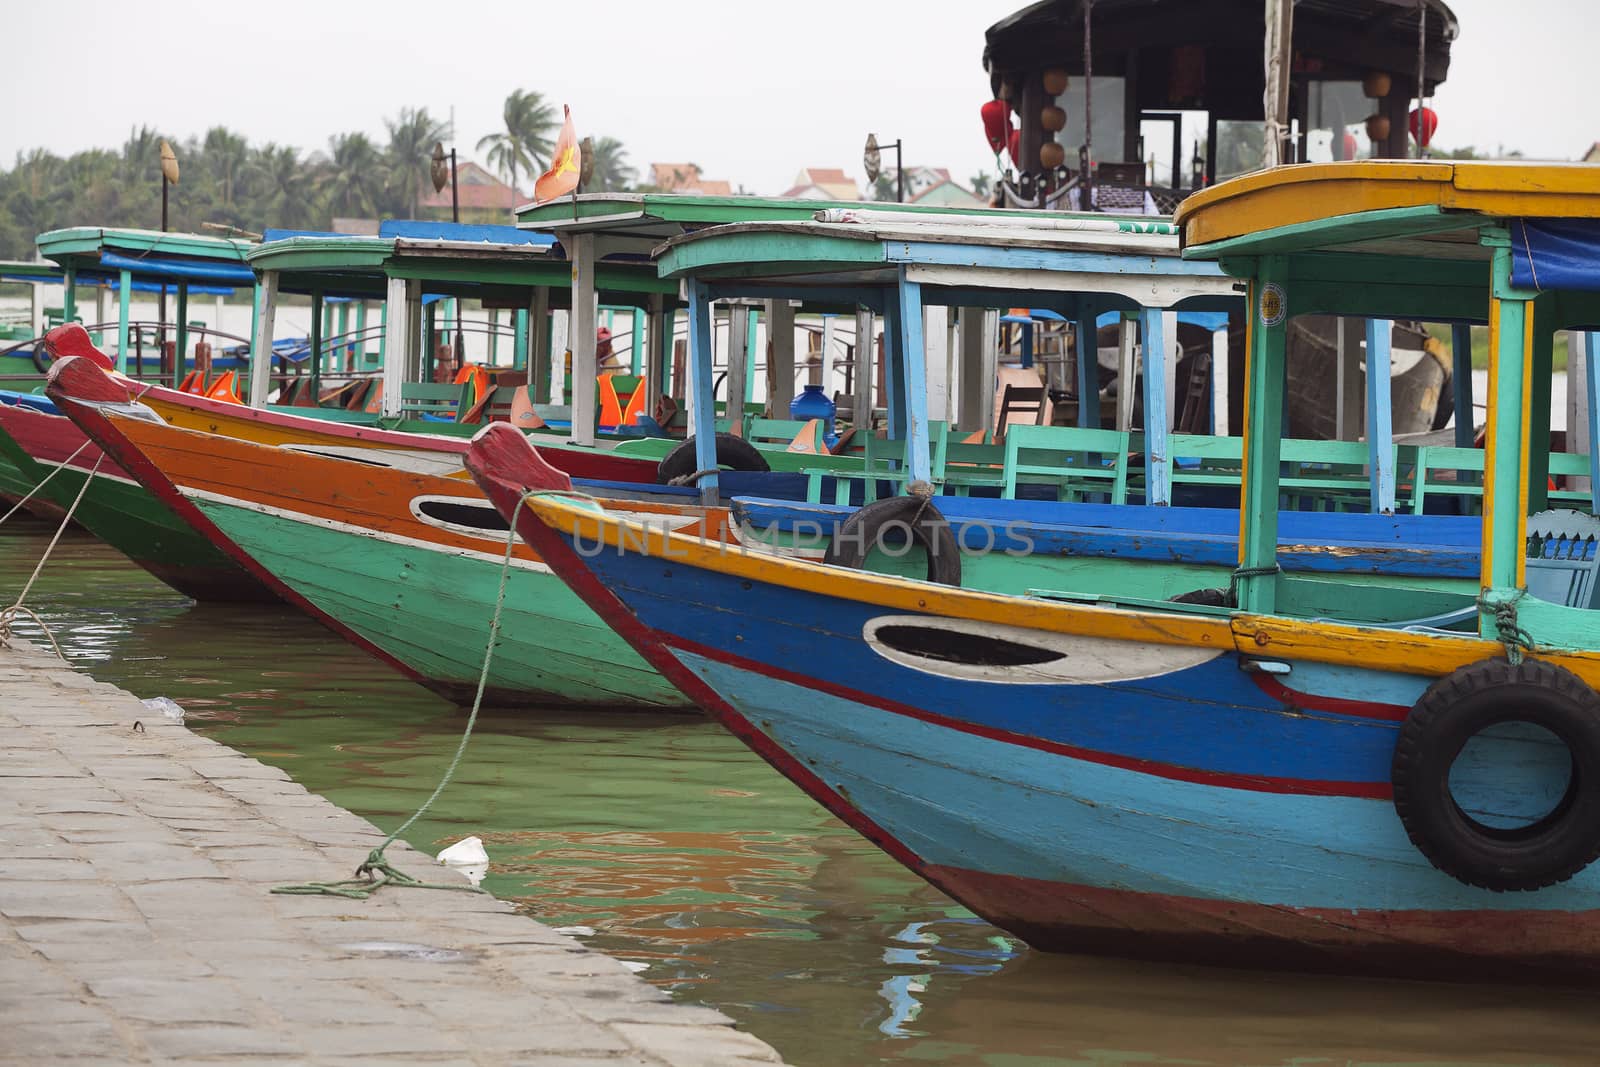 Colorful boats in Hoi An, Vietnam by Goodday